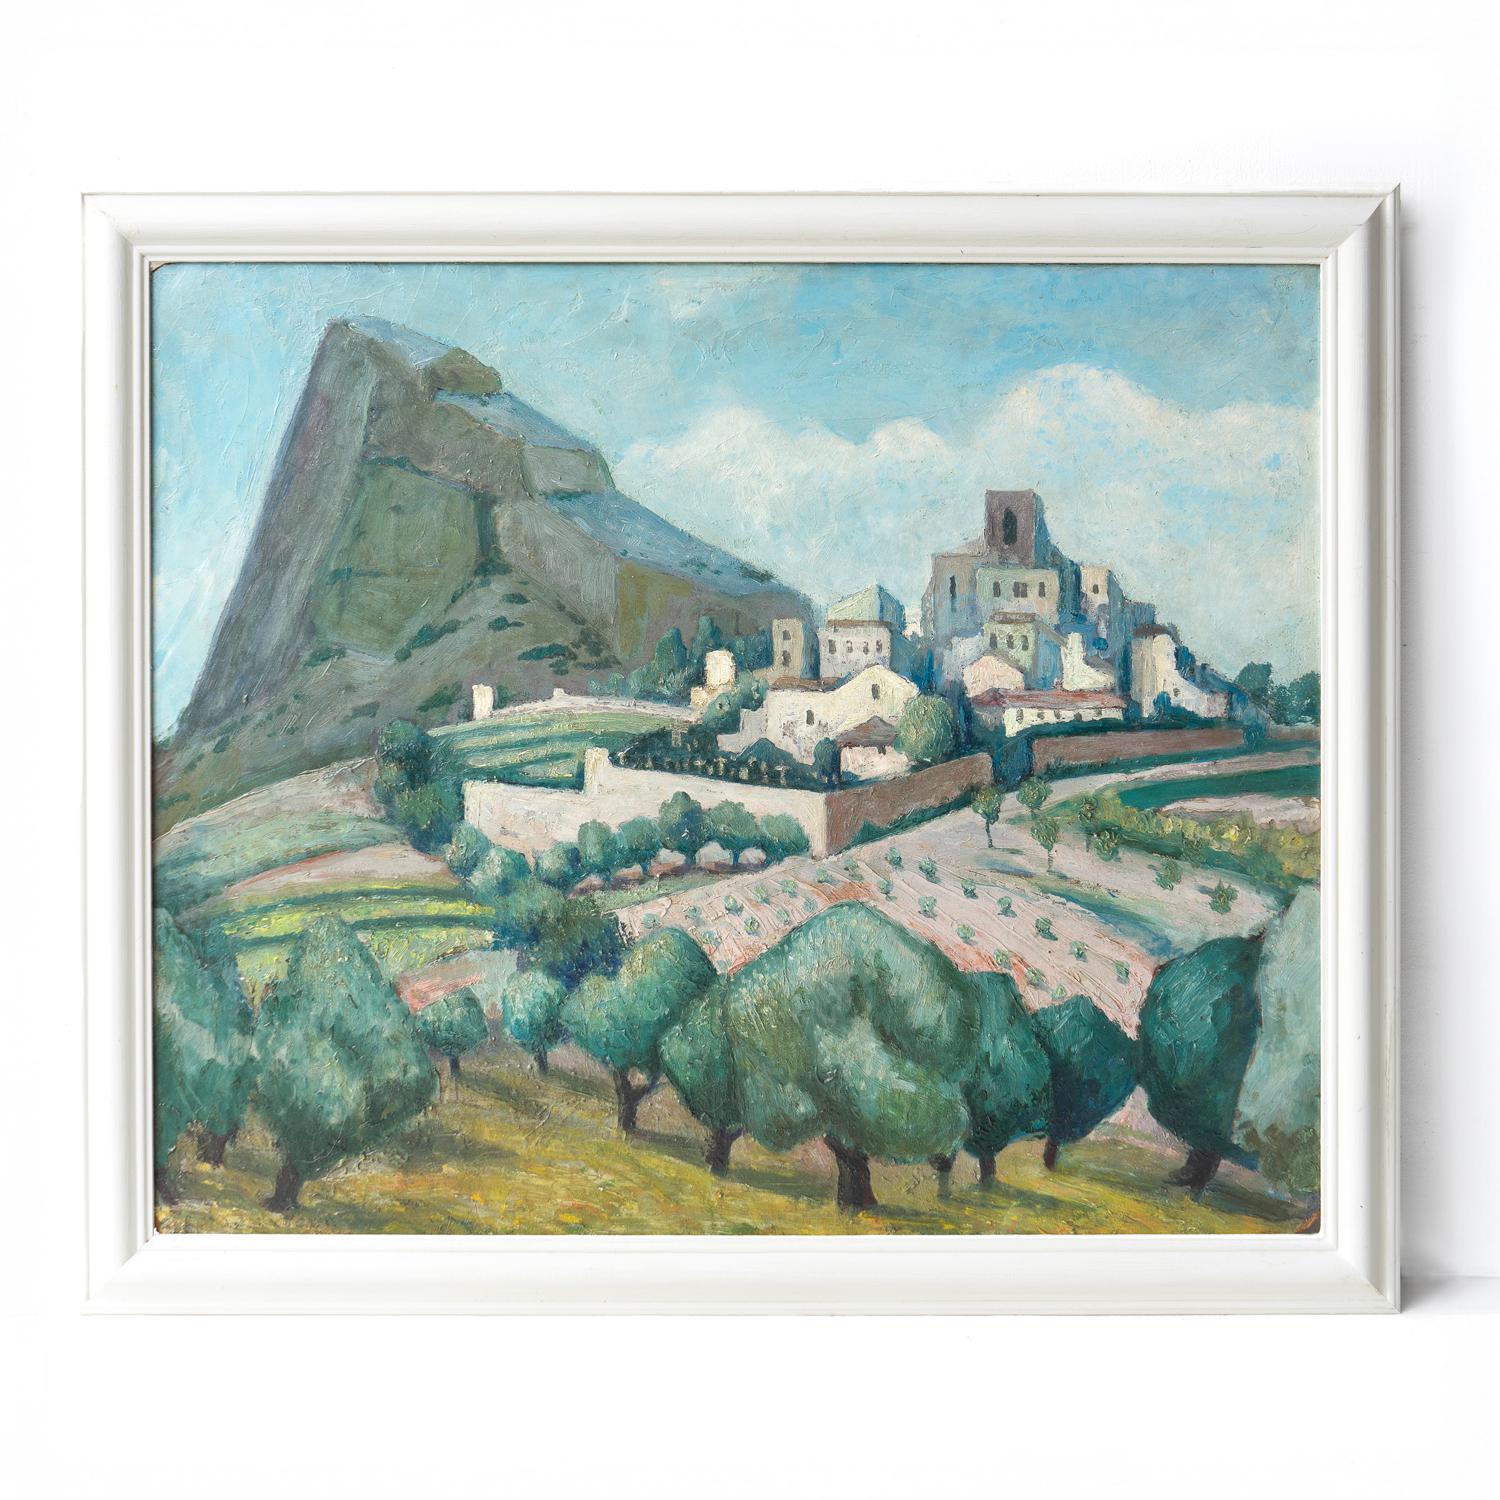 ANTIQUE ORIGINAL OIL ON BOARD PAINTING

Depicting a scene thought to be of a village in Southern France with a mountain dominating the background. The shape of the buildings from the village are echoed by the shape of the mountain. In the